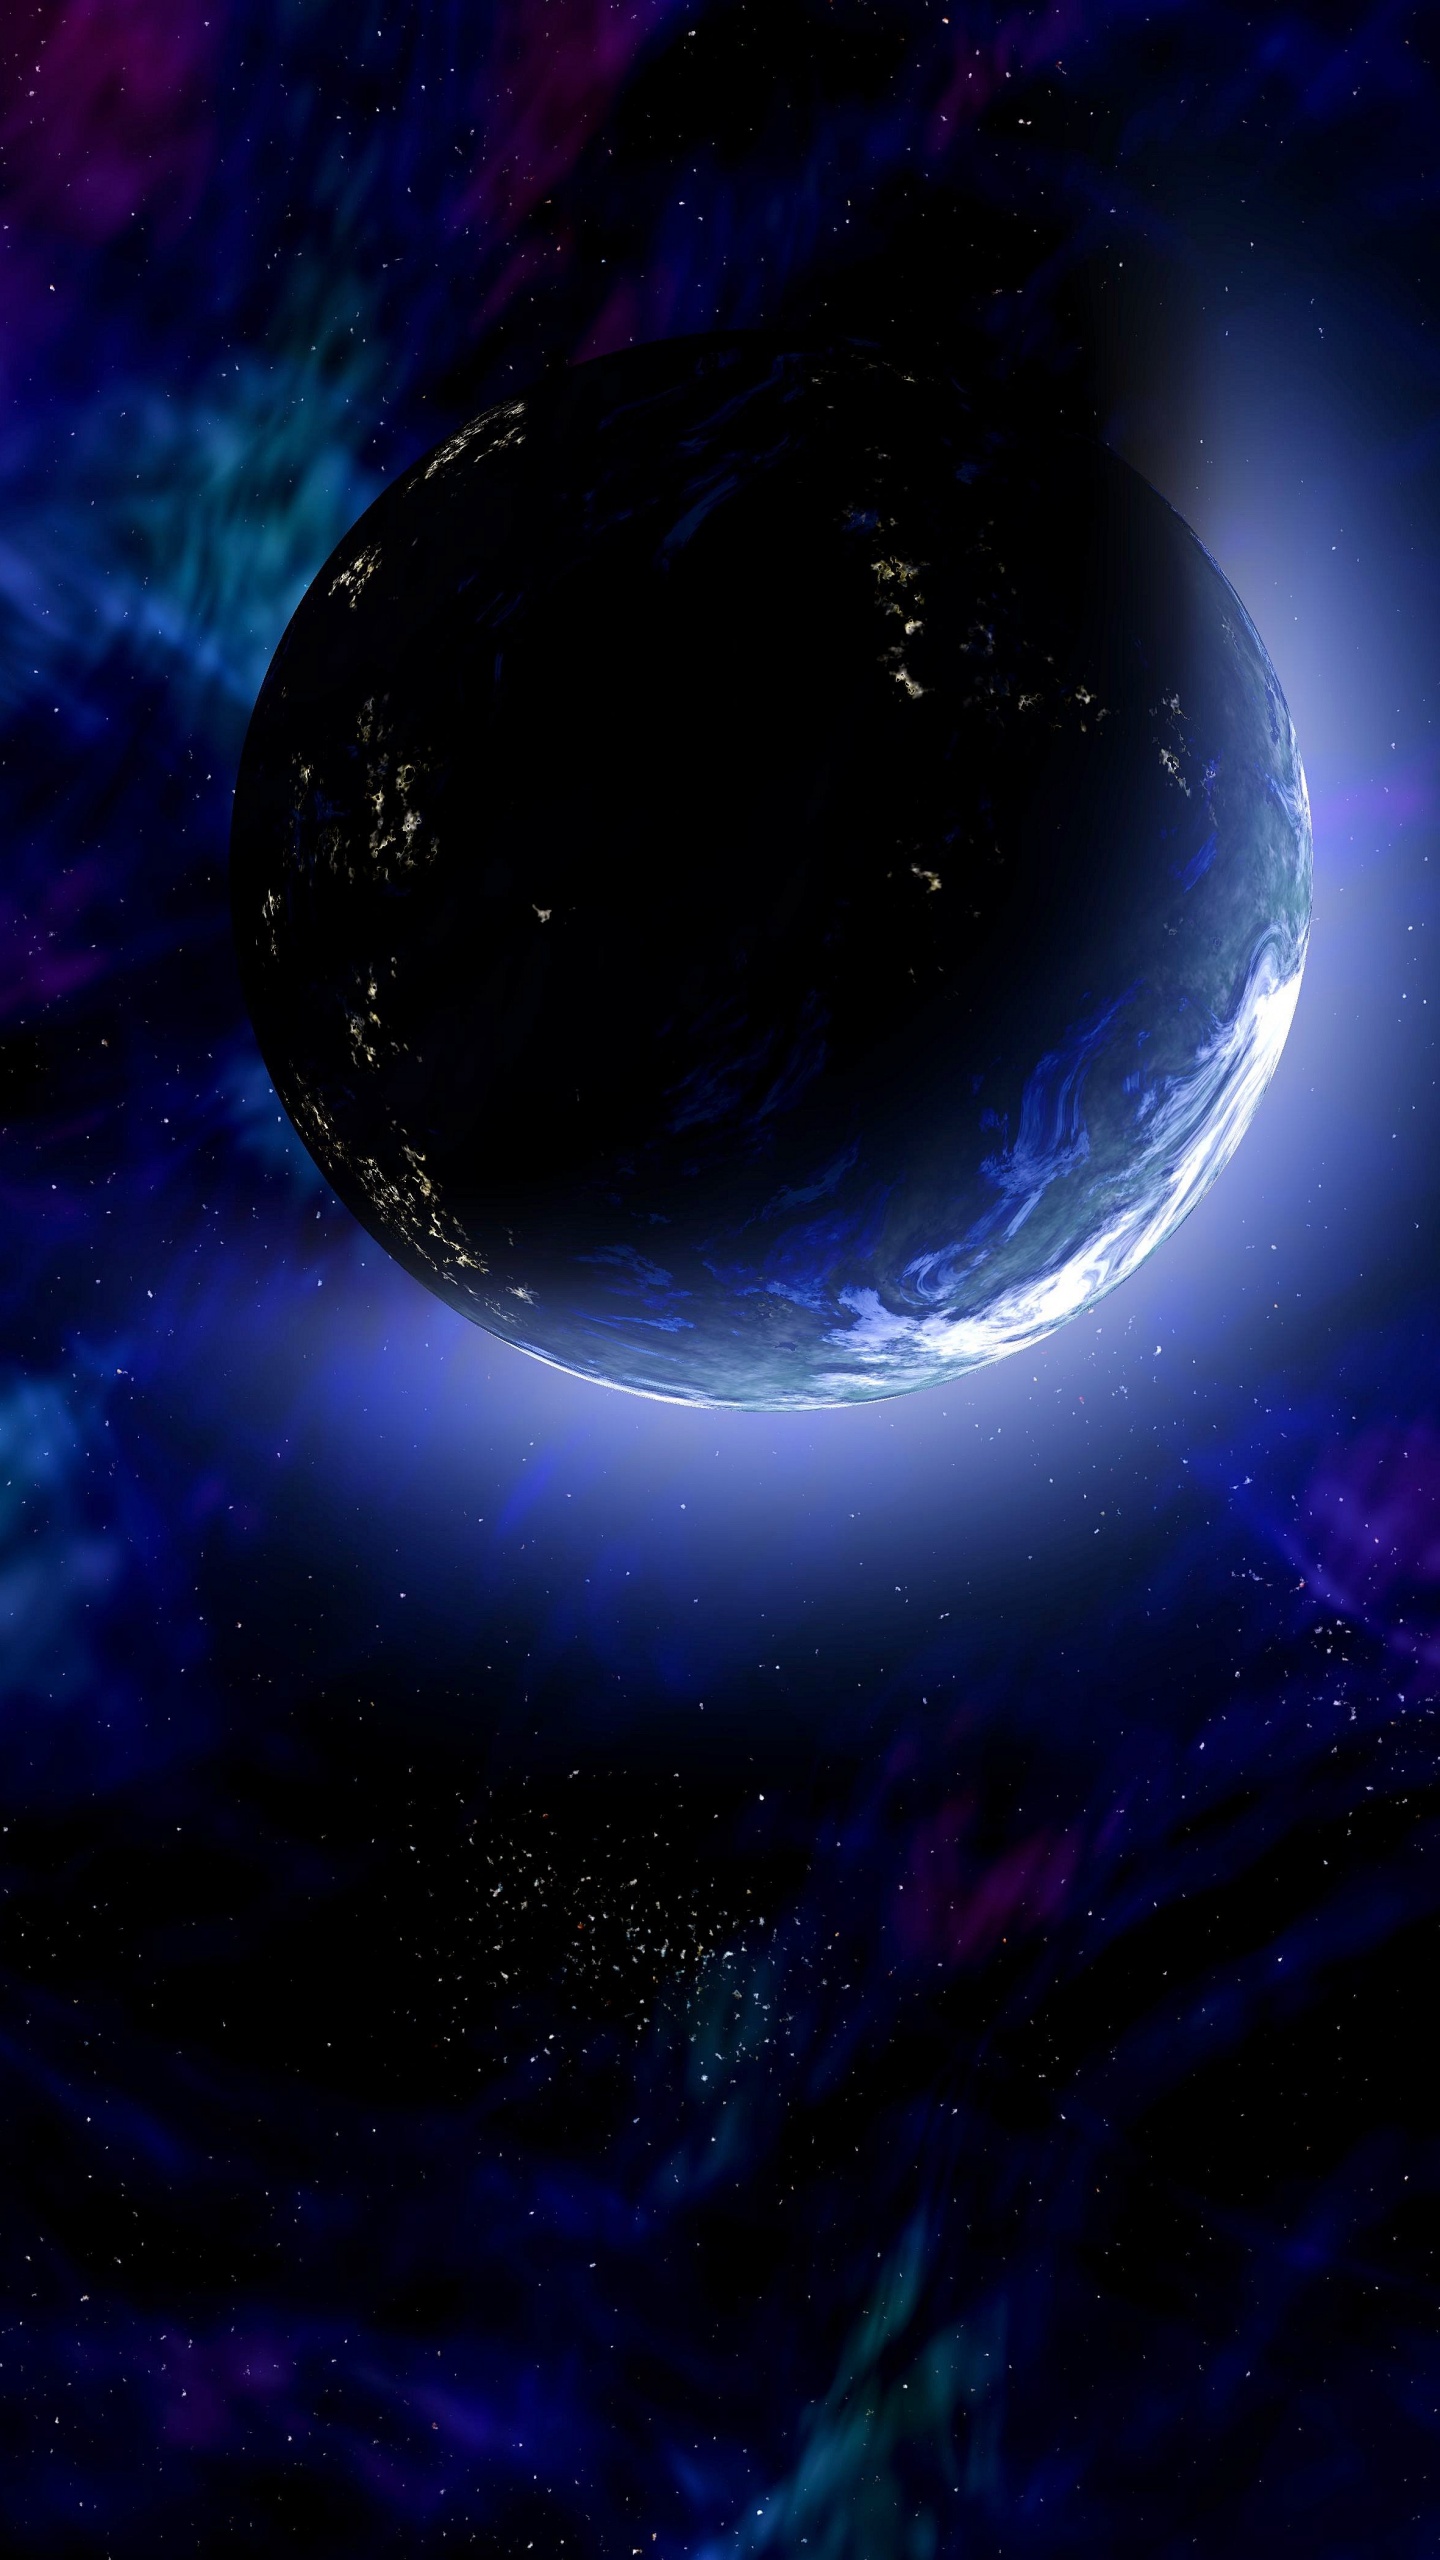 Blue and White Planet Painting. Wallpaper in 1440x2560 Resolution